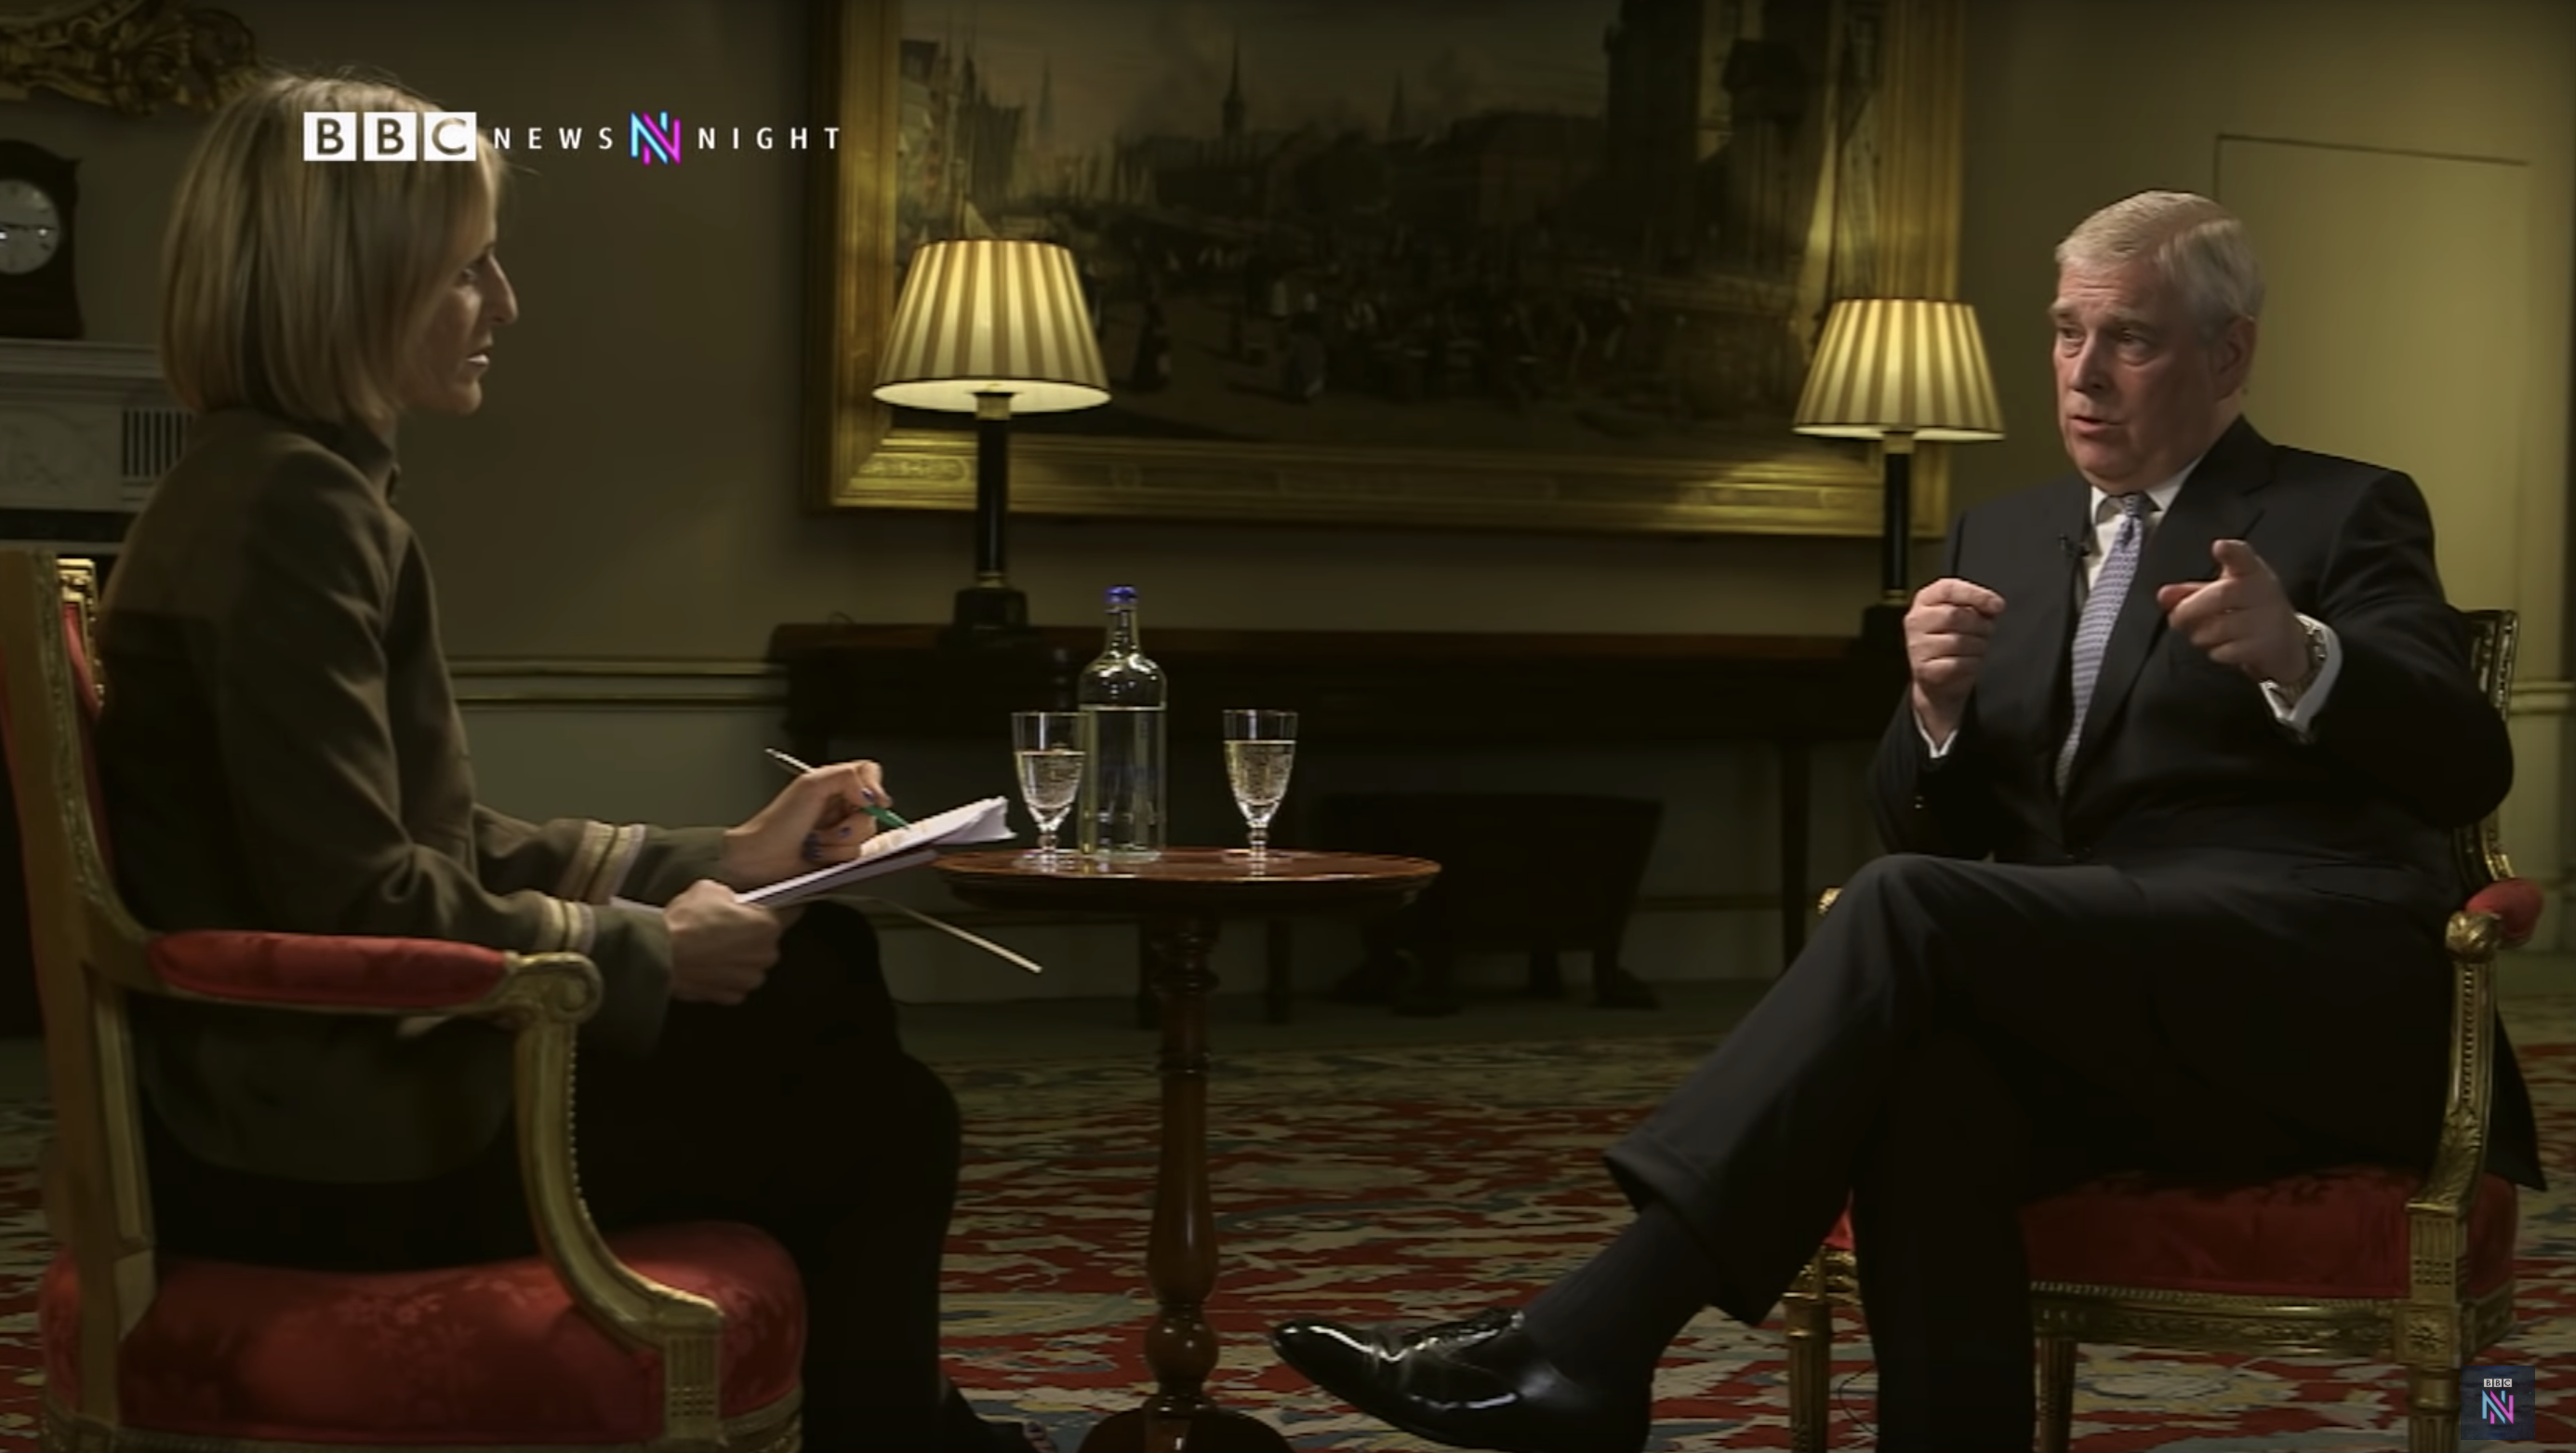 Bbc Newsnight Interview With Prince Andrew Draws Record Ratings Tbi Vision